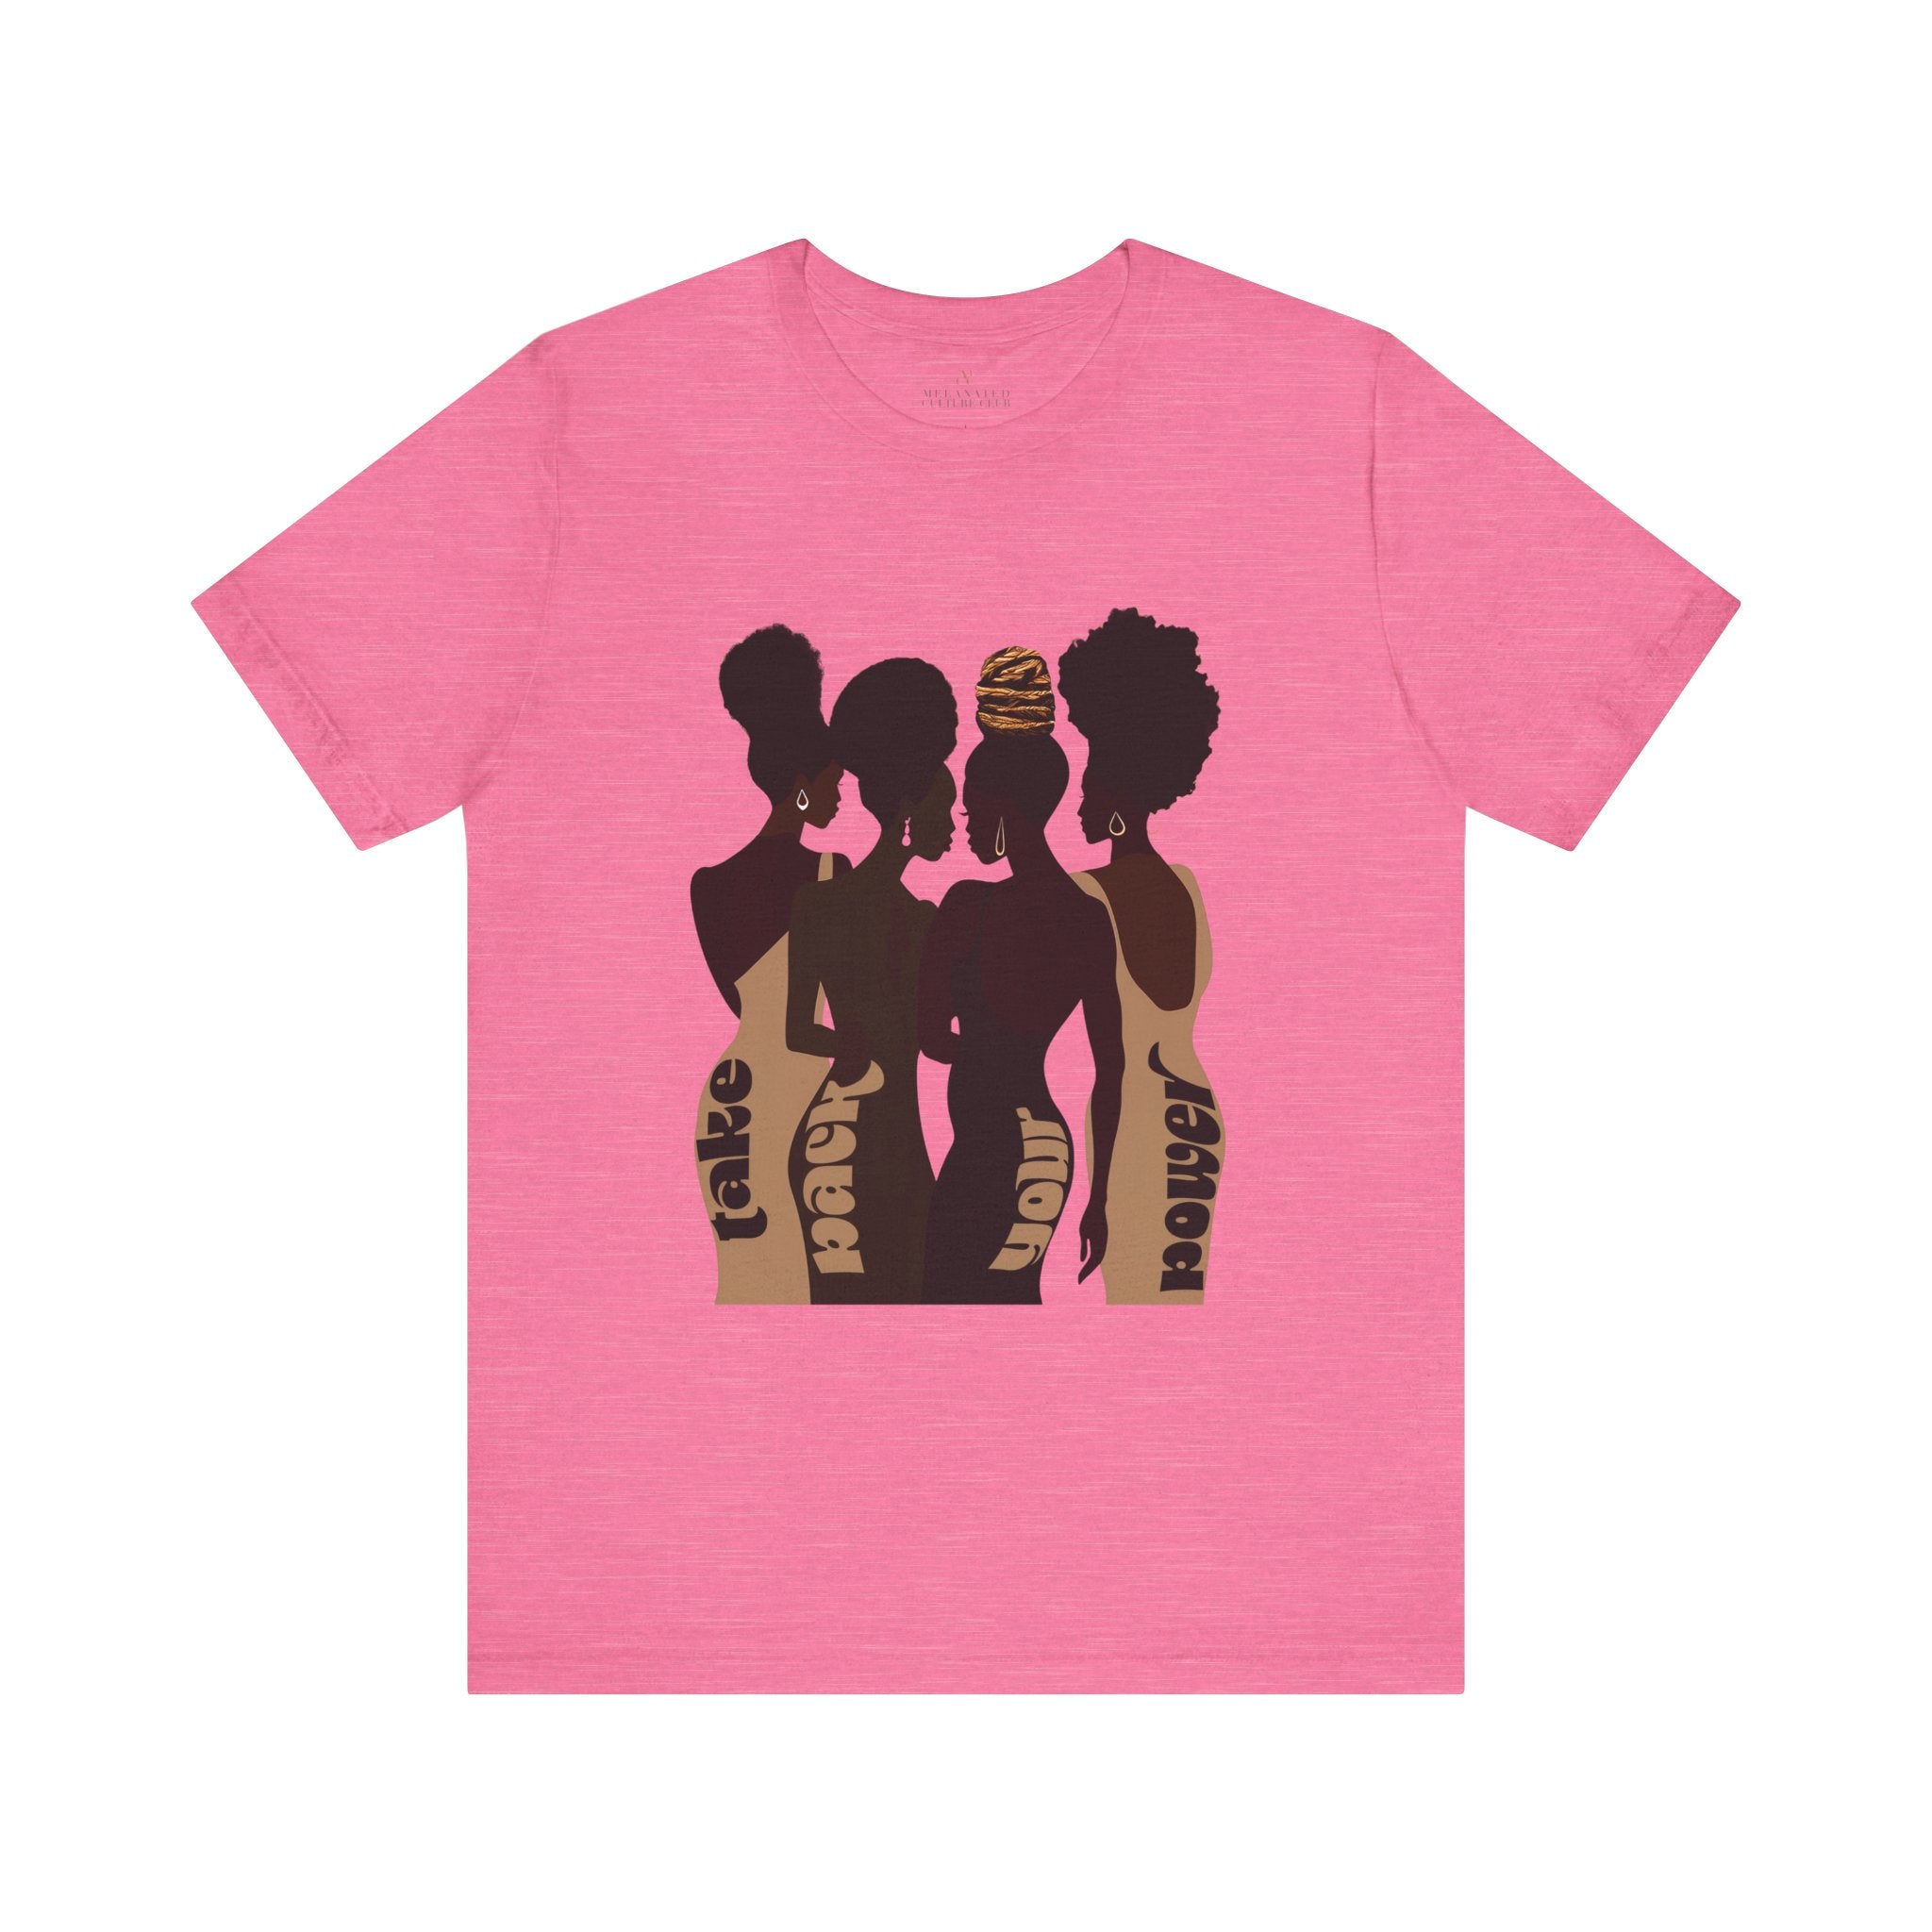 African American Women Tee Take Back Your Power Shirt in pink.